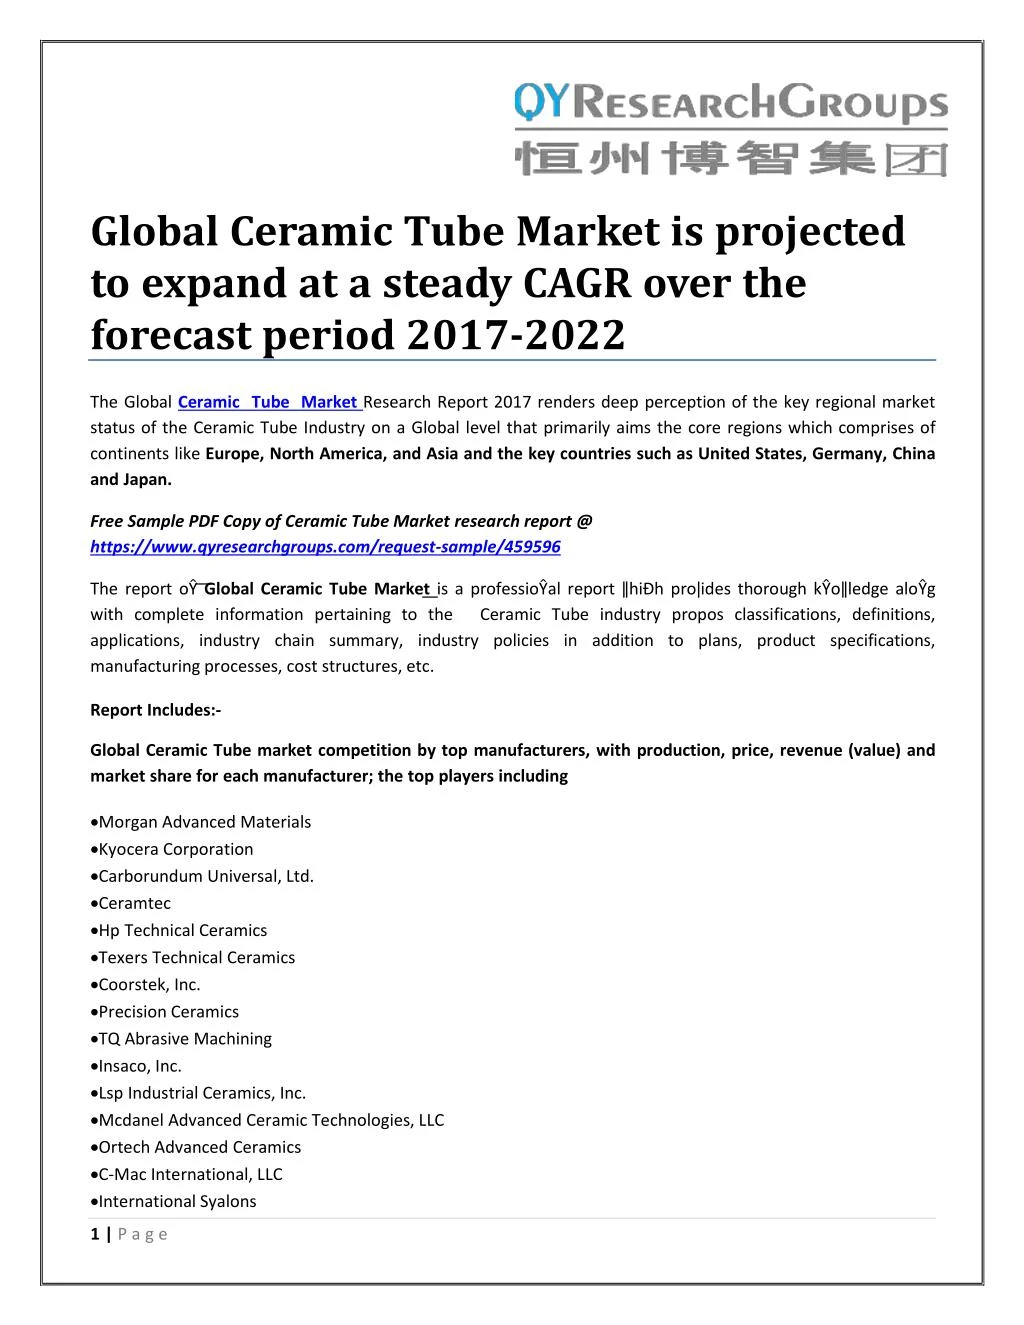 global ceramic tube market is projected to expand